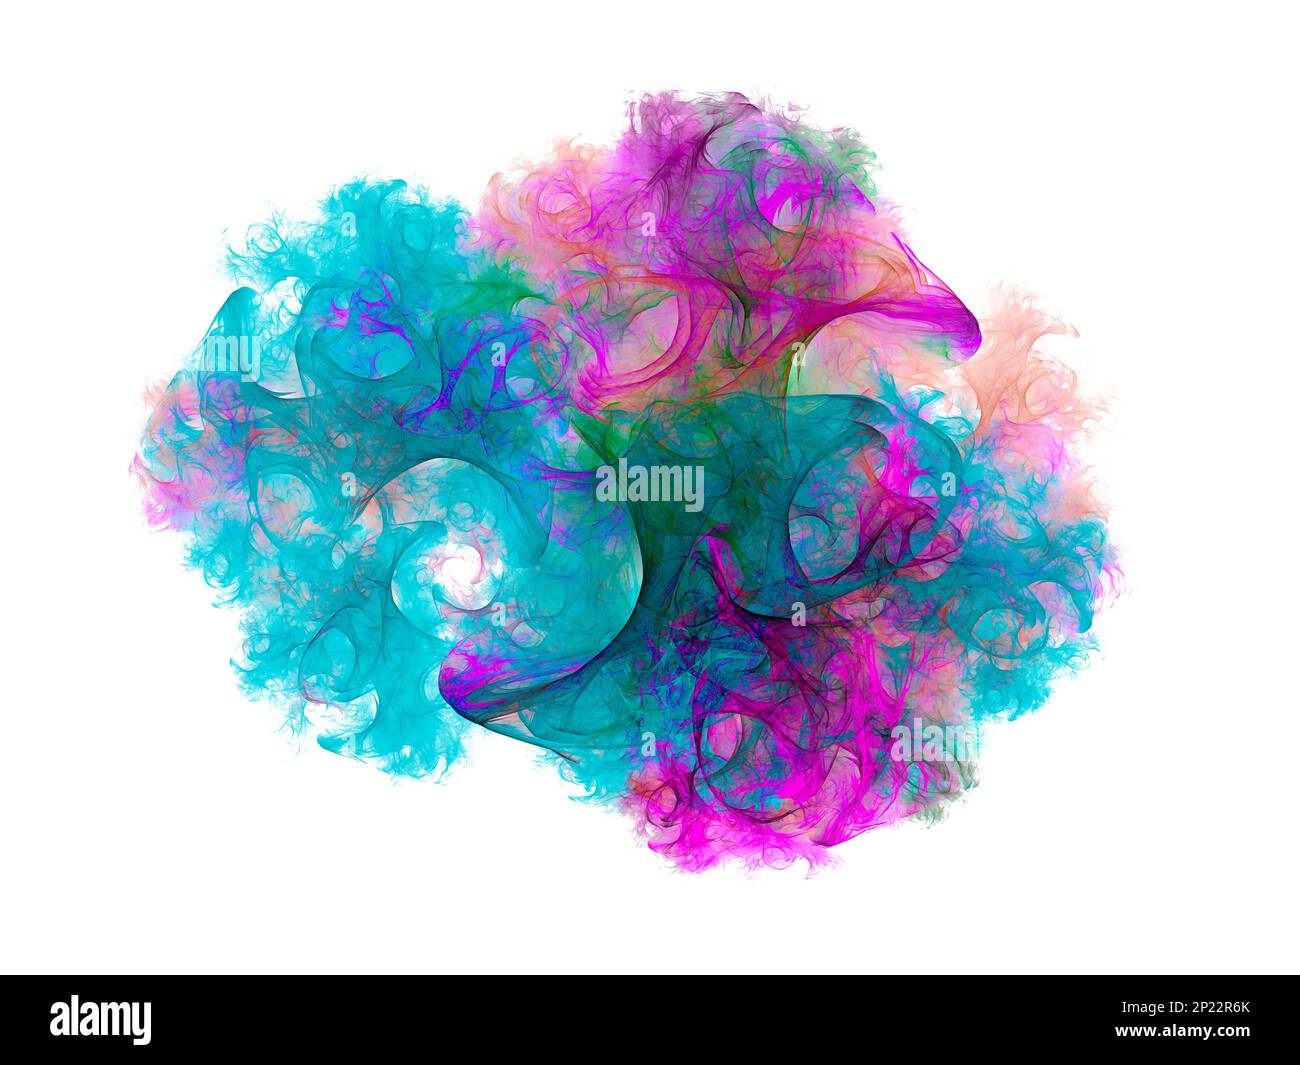 Abstract background illustration, modern hipster futuristic fractal flame graphic, colorful surreal poster, banne Stock Photo